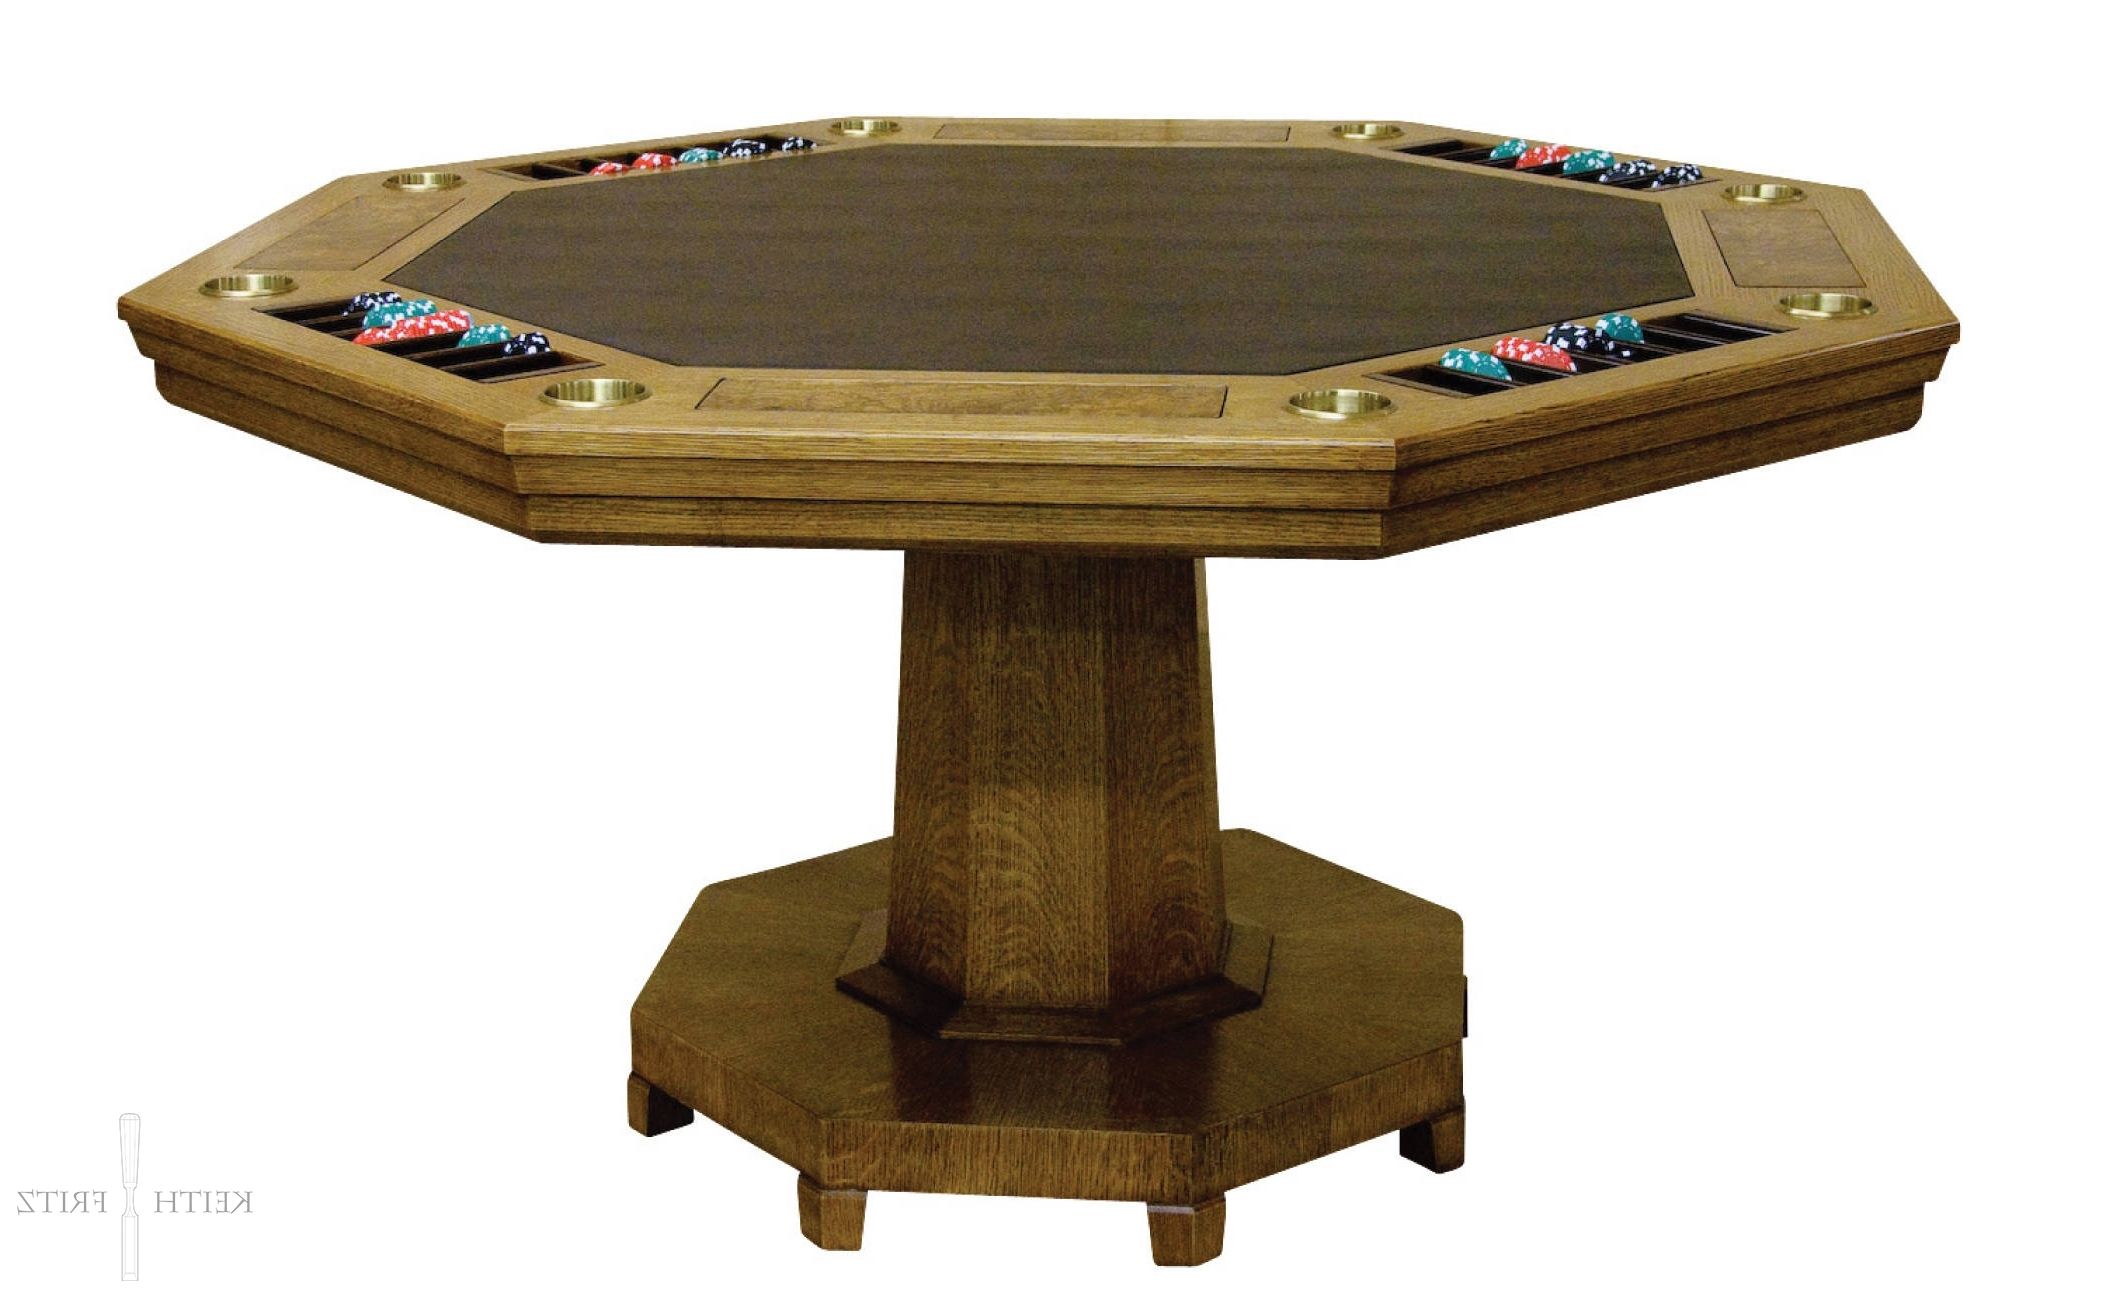 Octagon Console Tables In Favorite Octagon Poker Table 1 – Keith Fritz Fine Furniture (View 7 of 10)